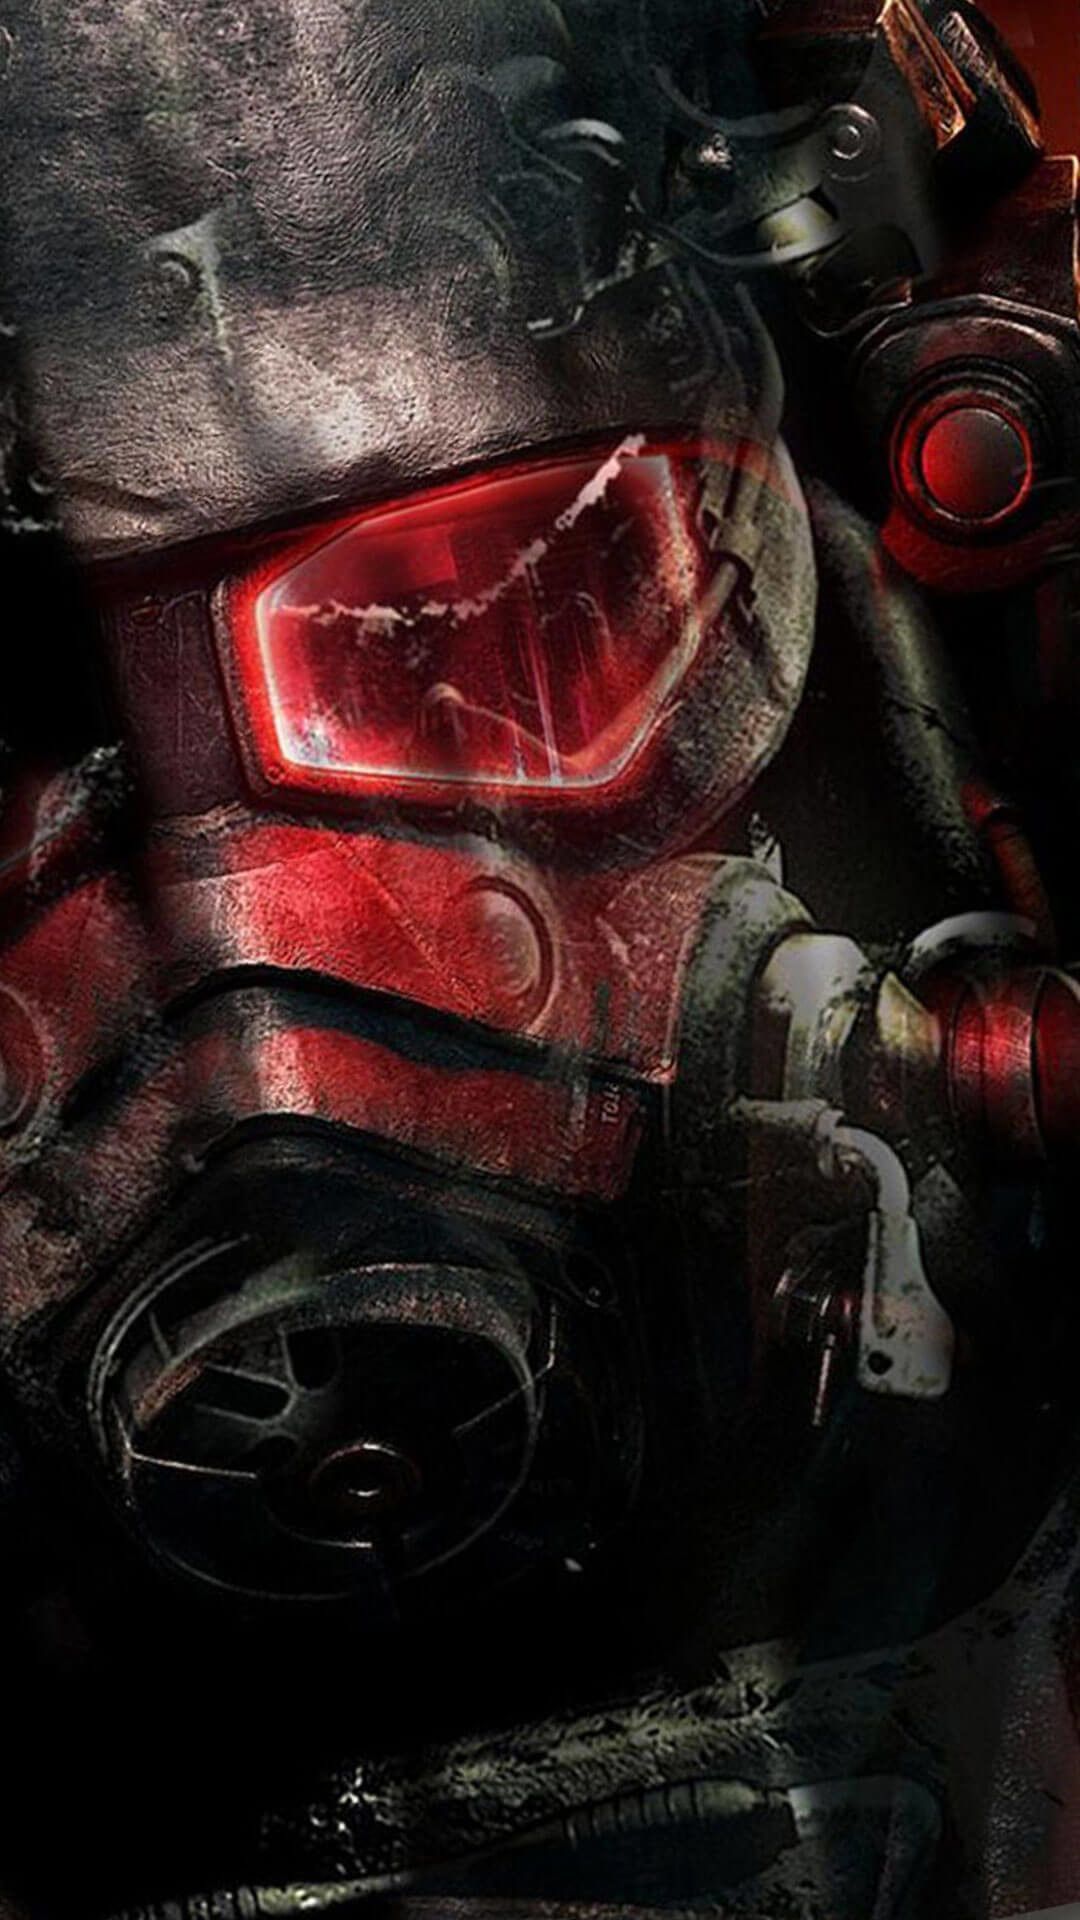 Fallout Background Hupages Download iPhone Wallpaper. Fallout wallpaper, Fallout background, iPhone wallpaper